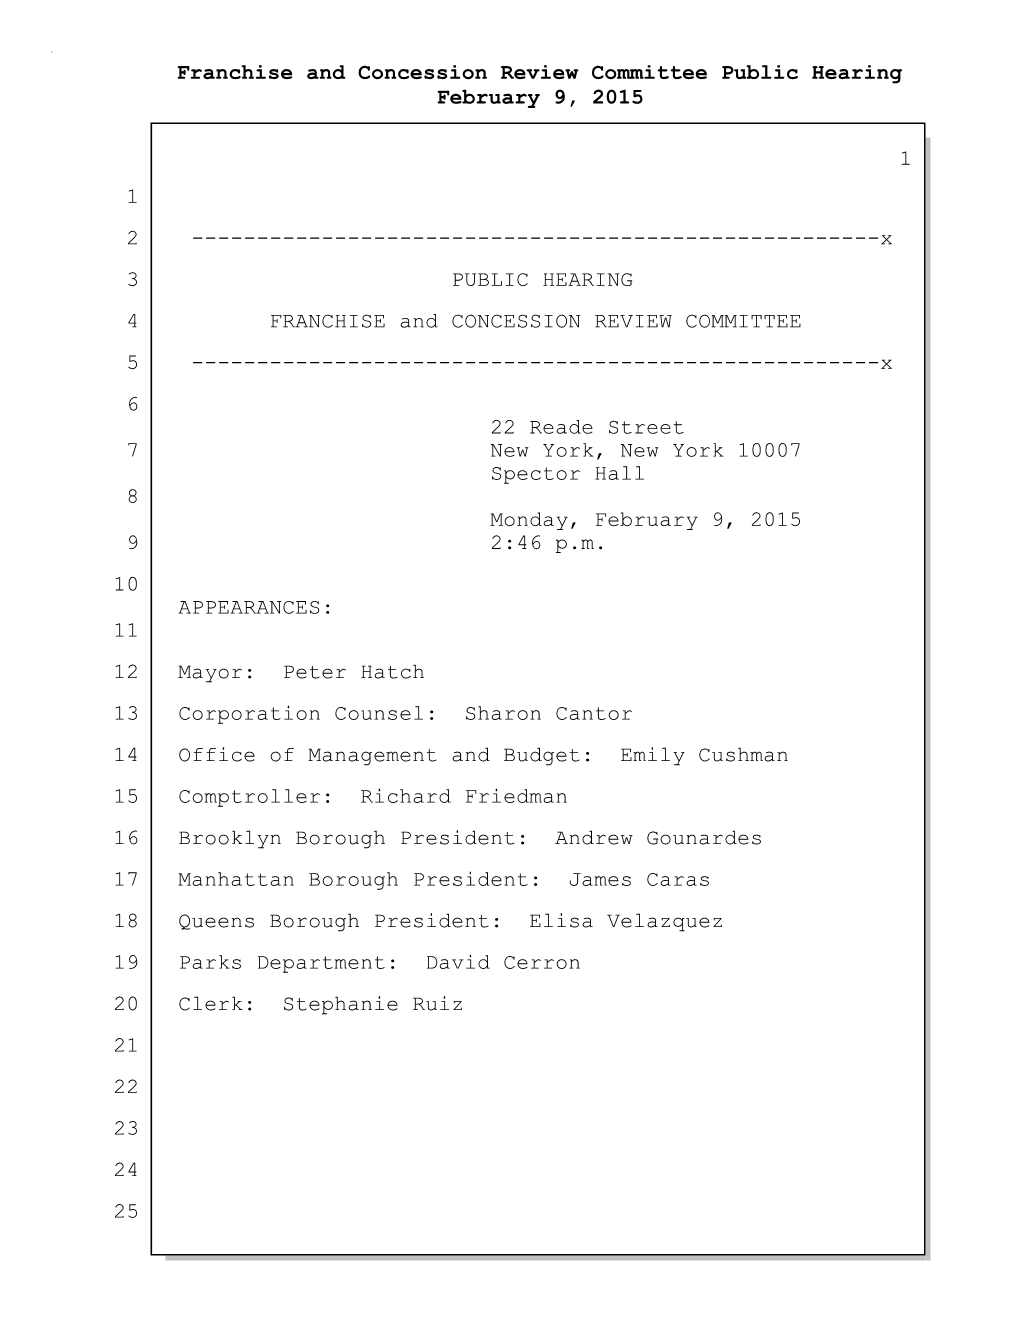 Franchise and Concession Review Committee Public Hearing February 9, 2015